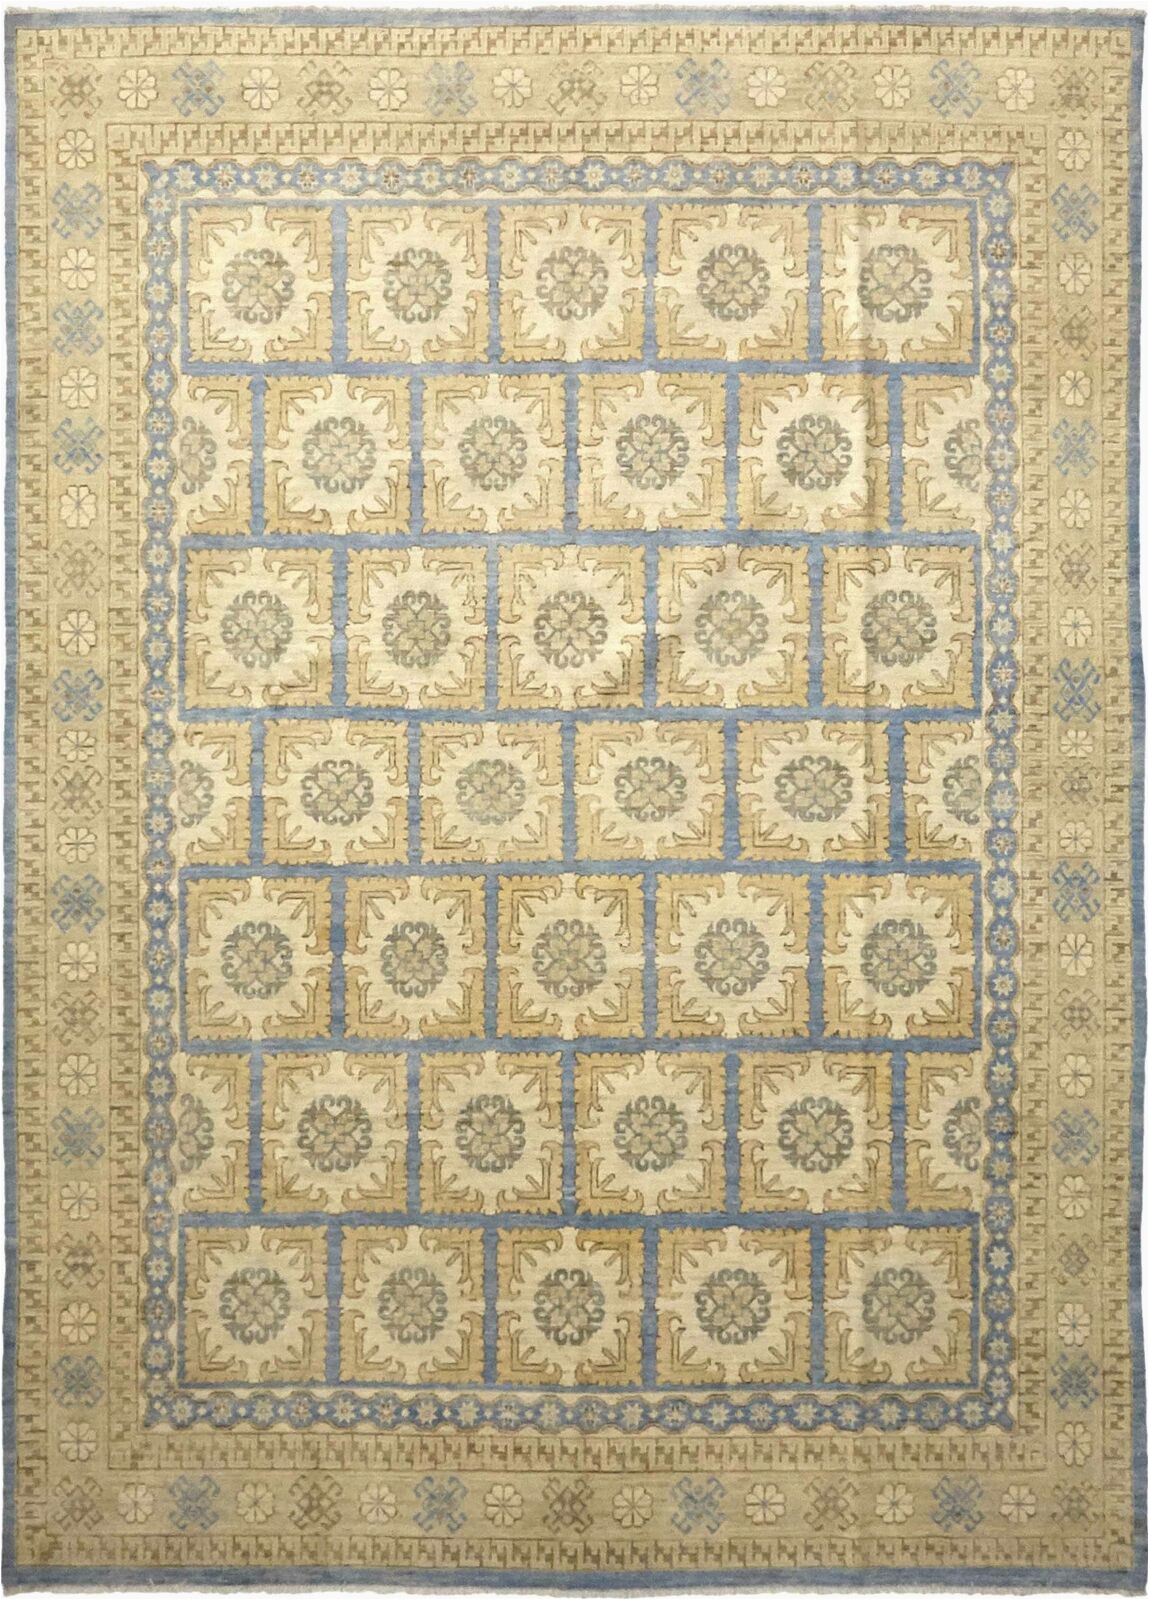 9 Foot Square area Rug solo Rugs Khotan Hand Knotted area Rug In Hazelnut Wool 9 X 12 Ft